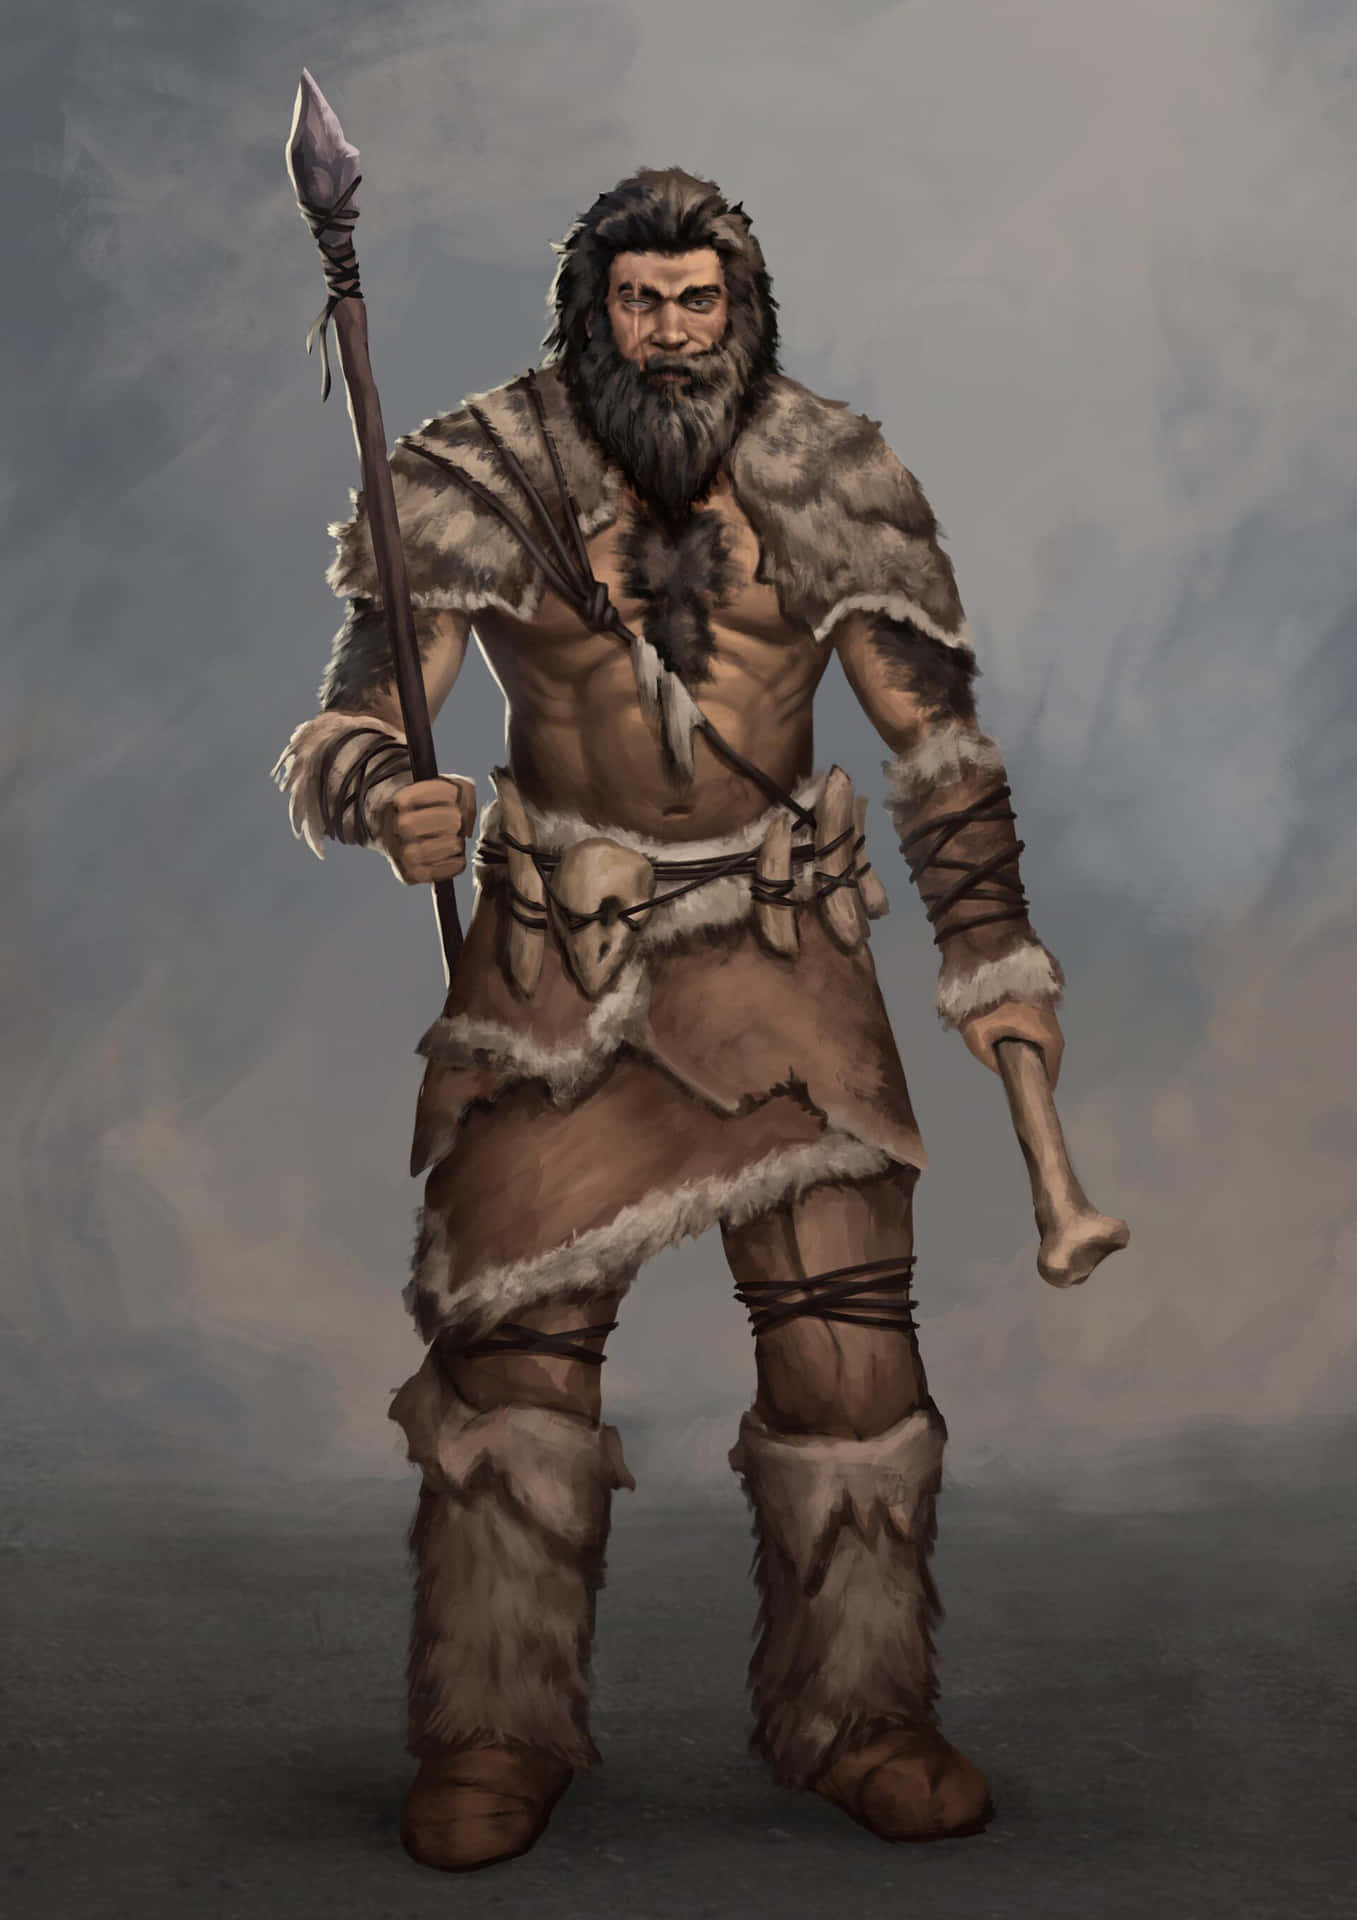 A Man In A Fur Coat And A Spear